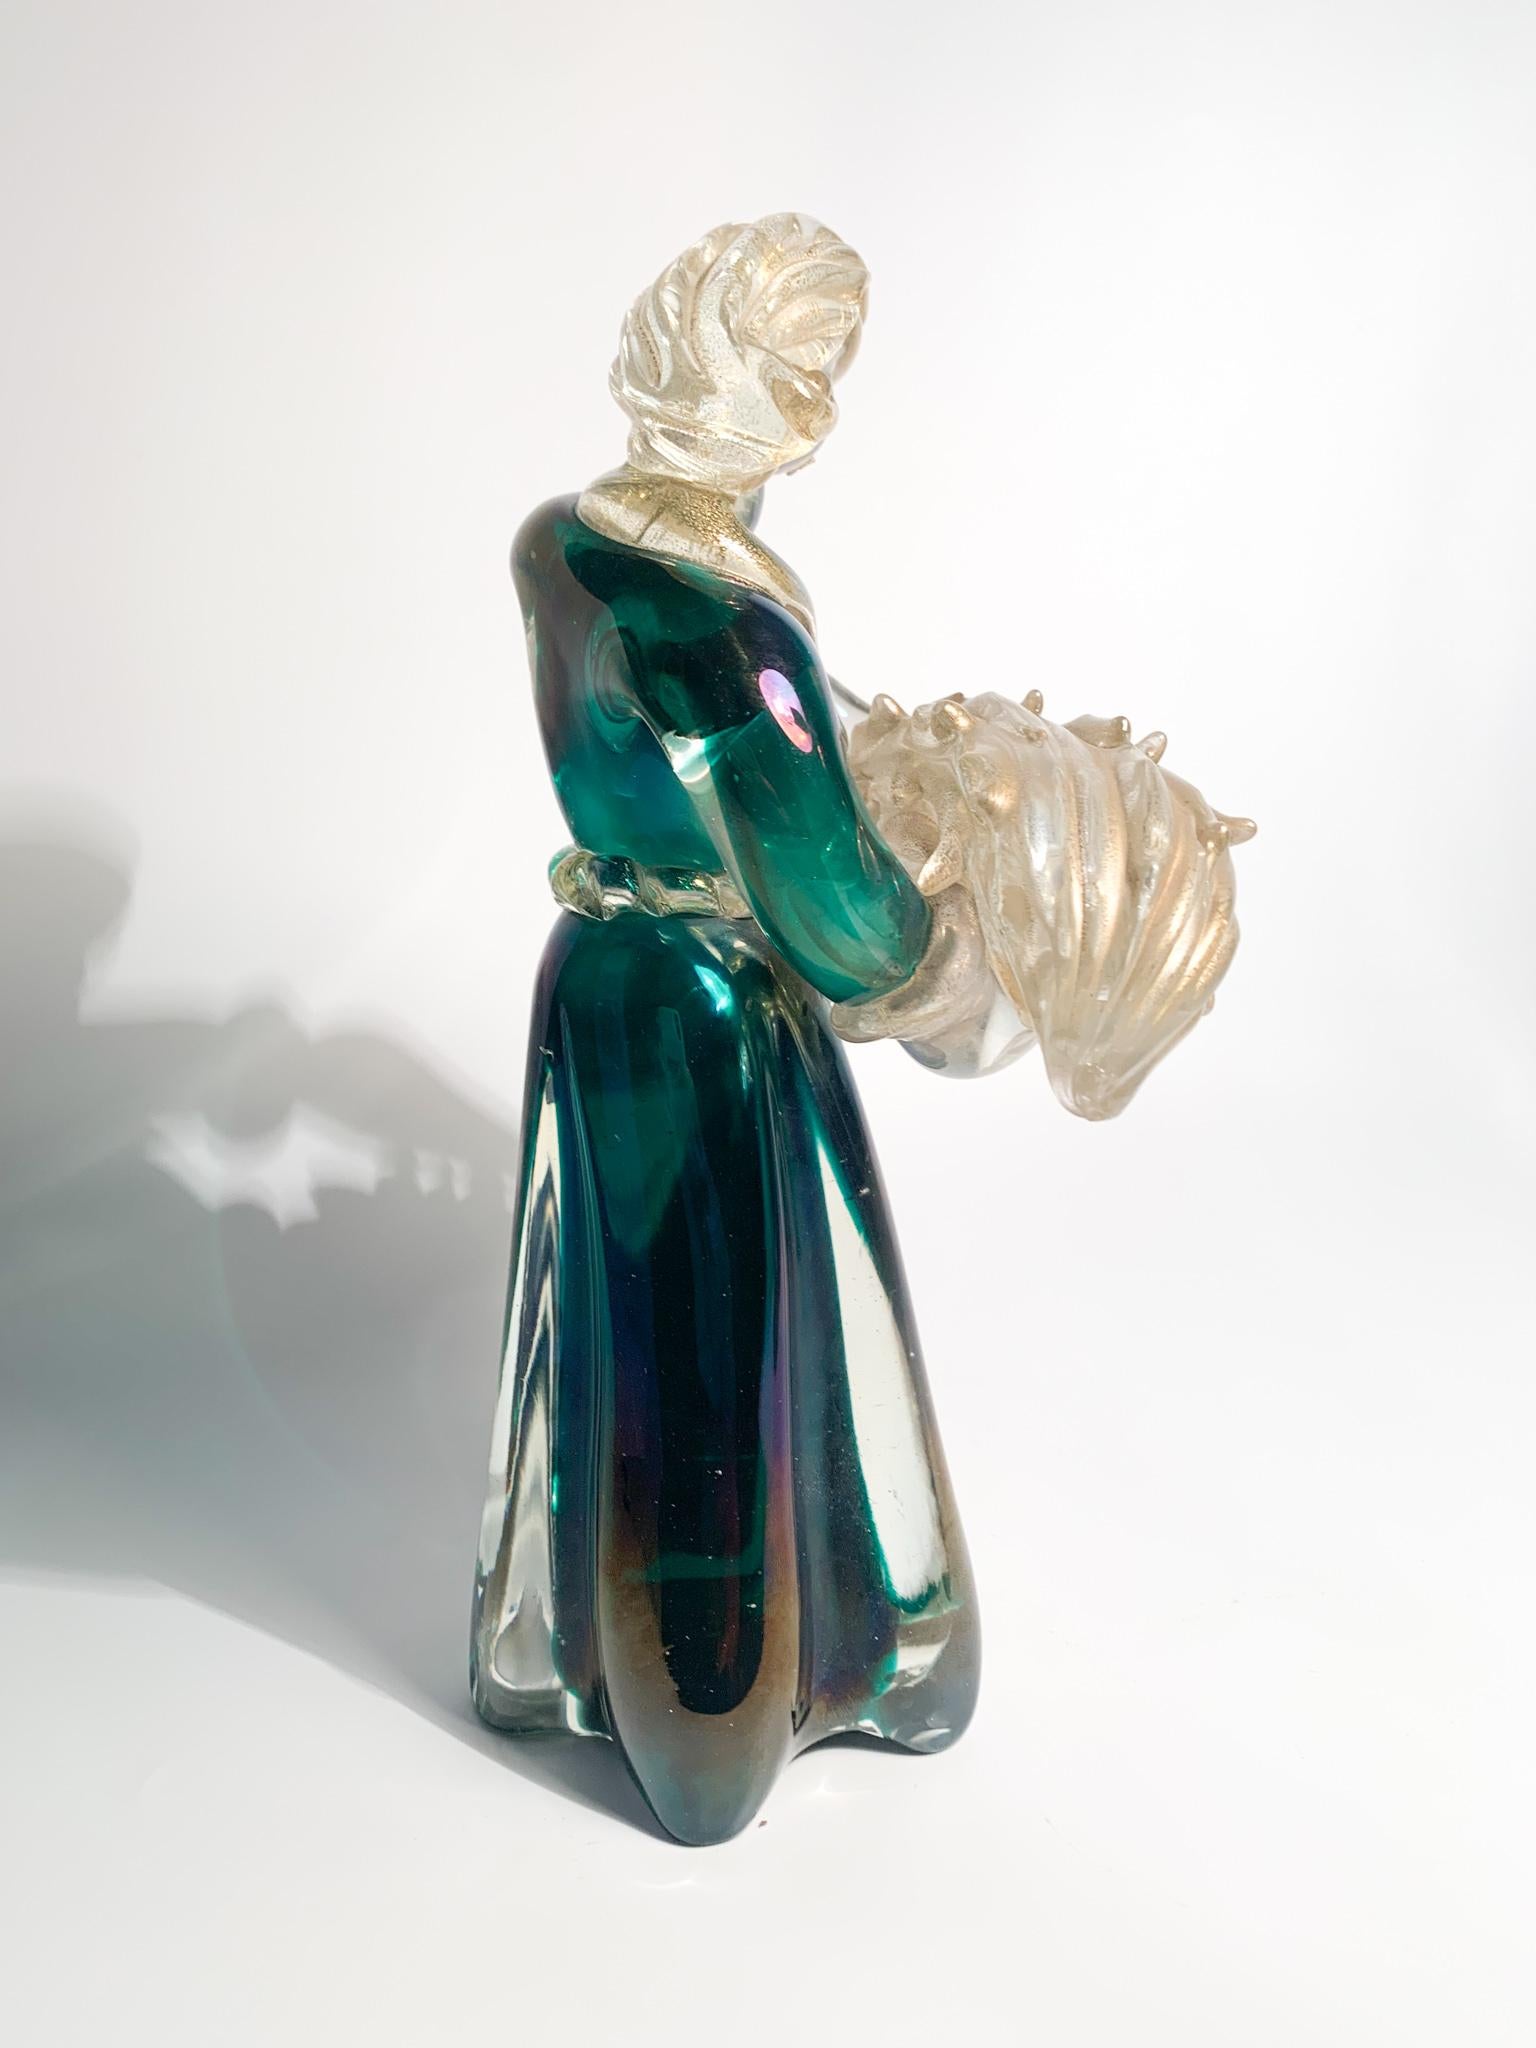 Mid-20th Century Iridescent Murano Glass Sculpture with Gold Leaves by Archimede Seguso 1940s For Sale